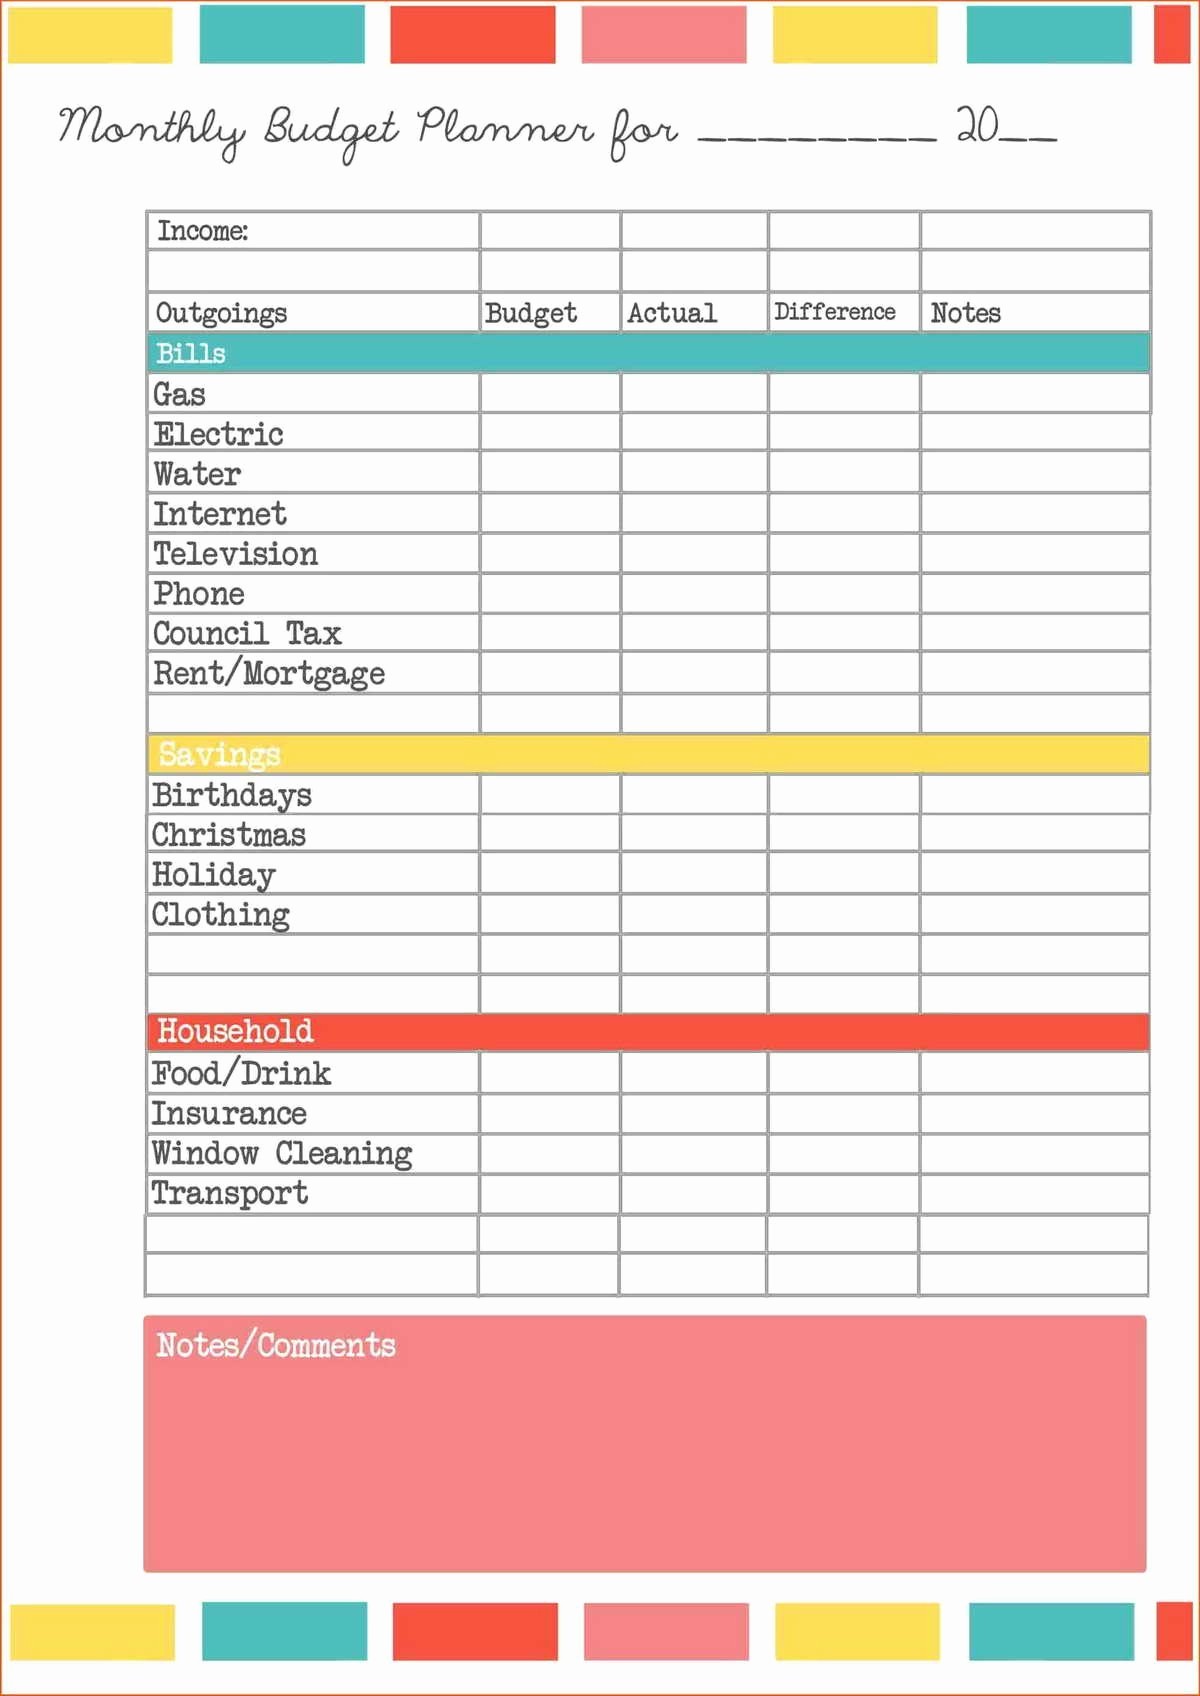 Small Business Spreadsheet For Income And Expenses On How To Make An Document Expenditure Template